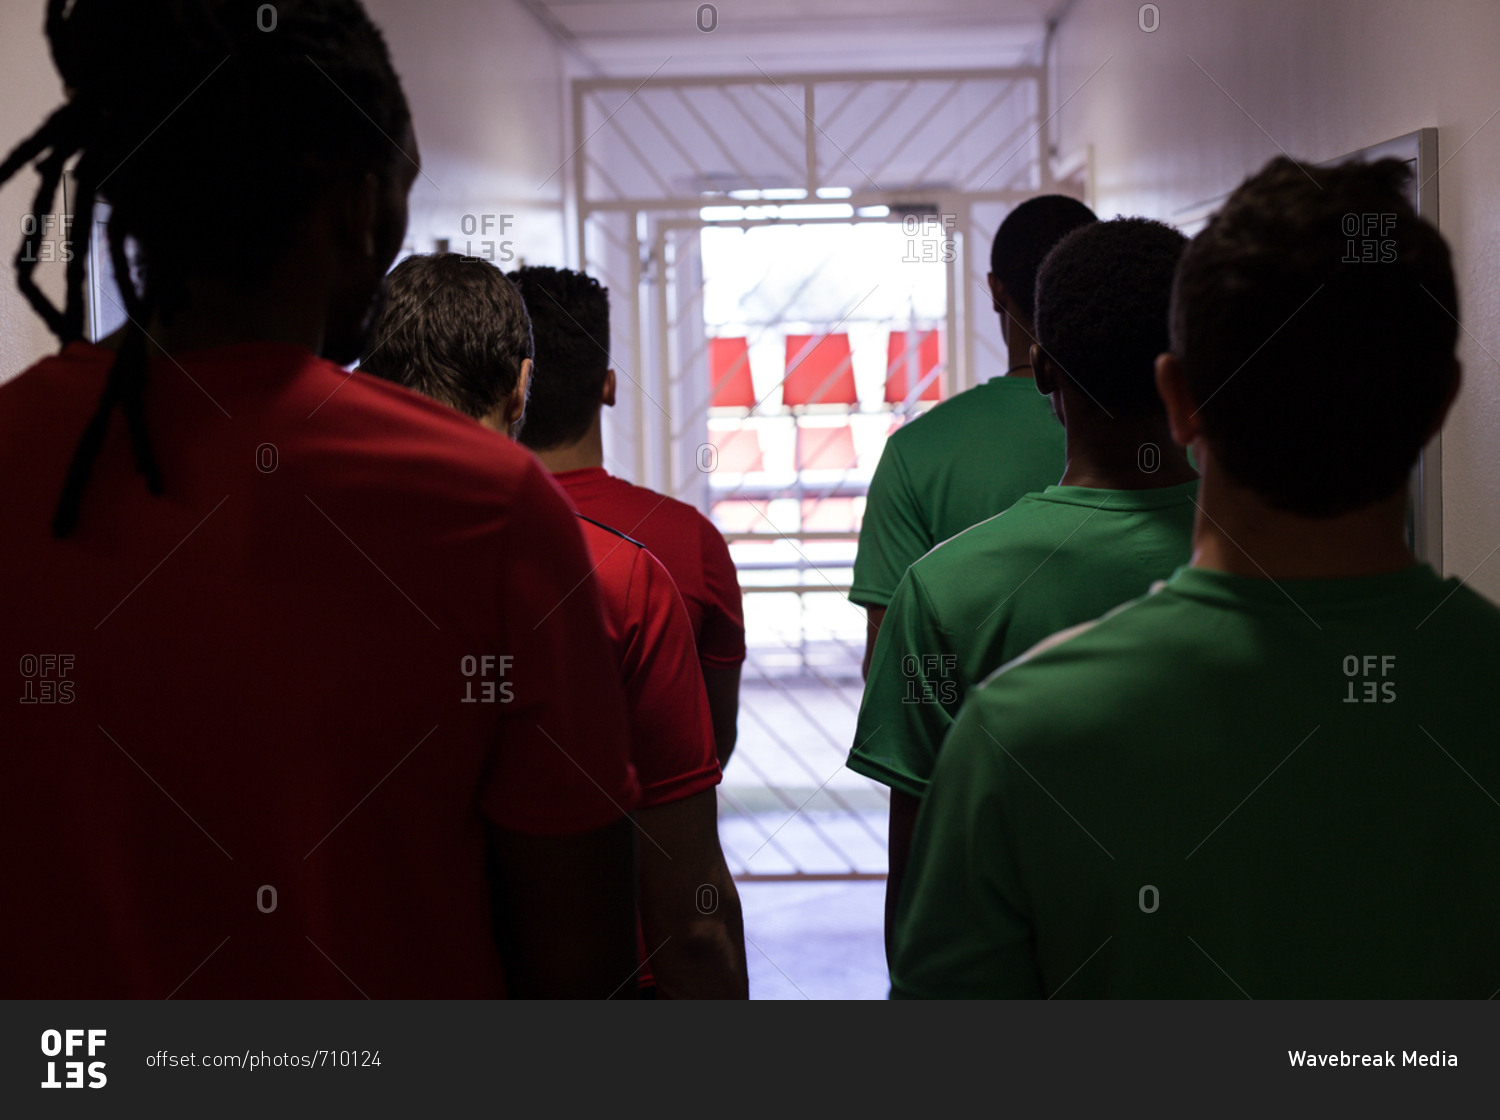 Rear view of football players leaving the dressing room